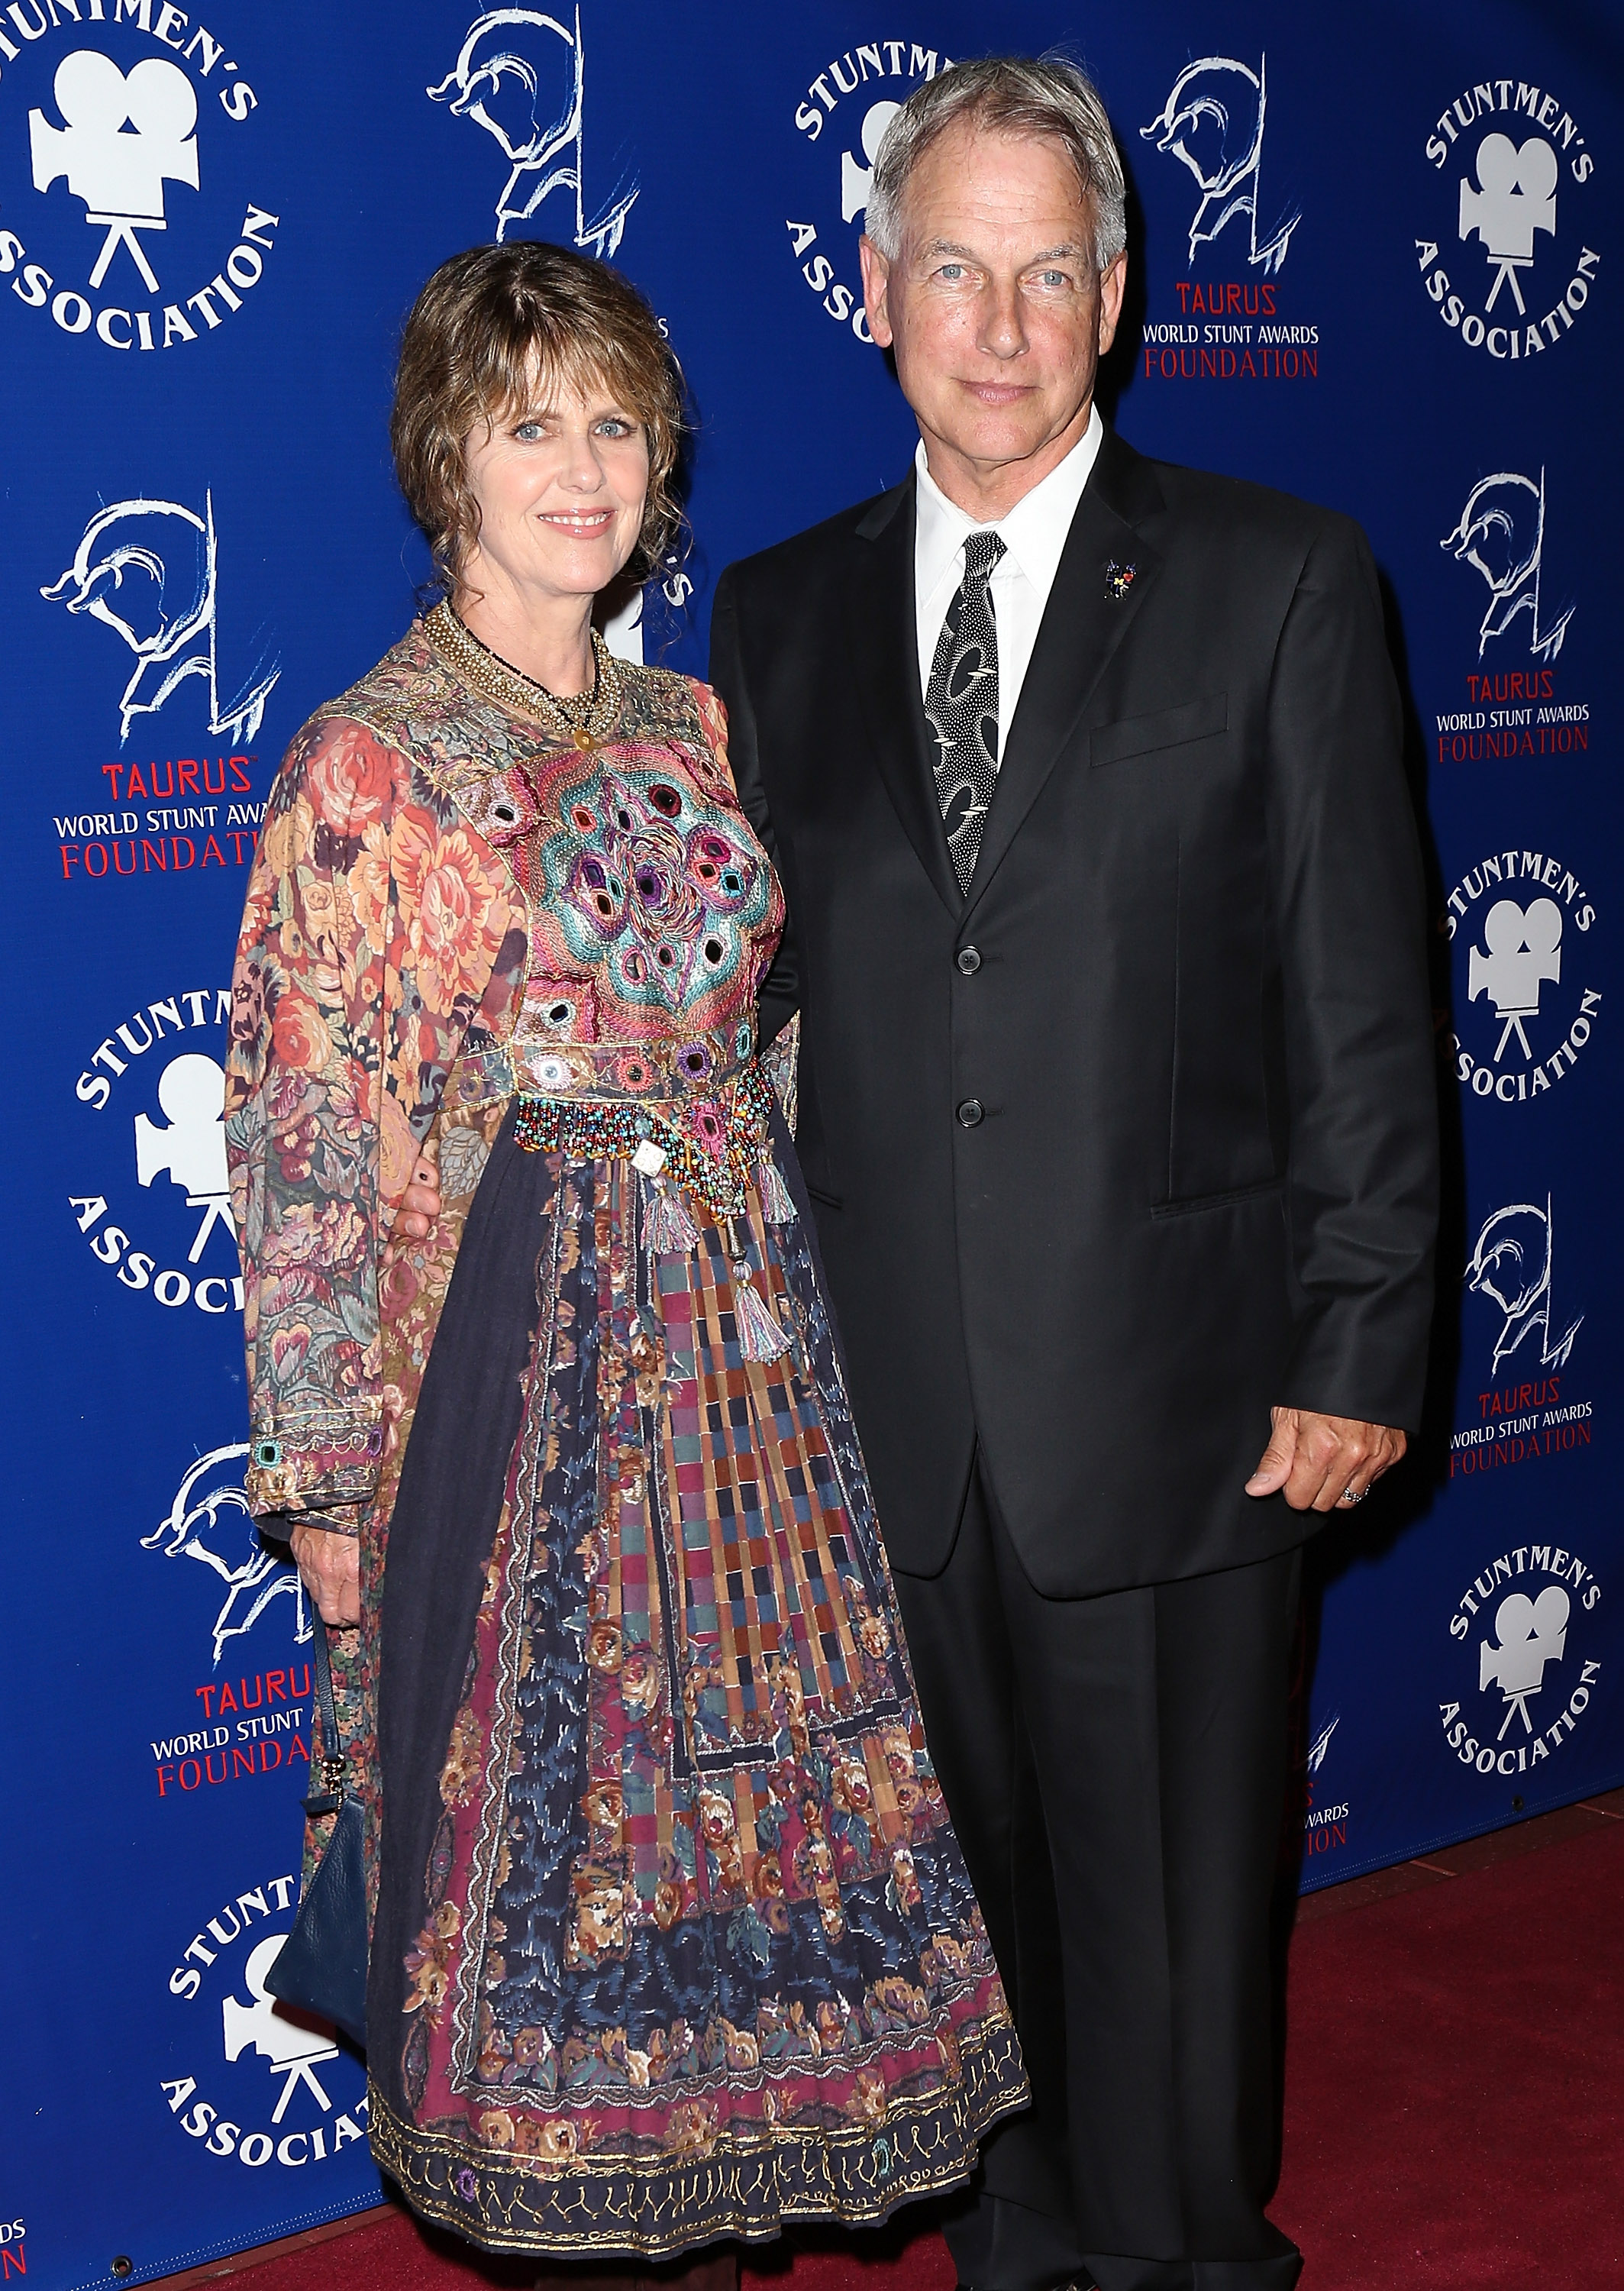 Pam Dawber and Mark Harmon at The Stuntmen's Association Of Motion Pictures 52nd Annual Awards Dinner in California, 2013 | Source: Getty Images